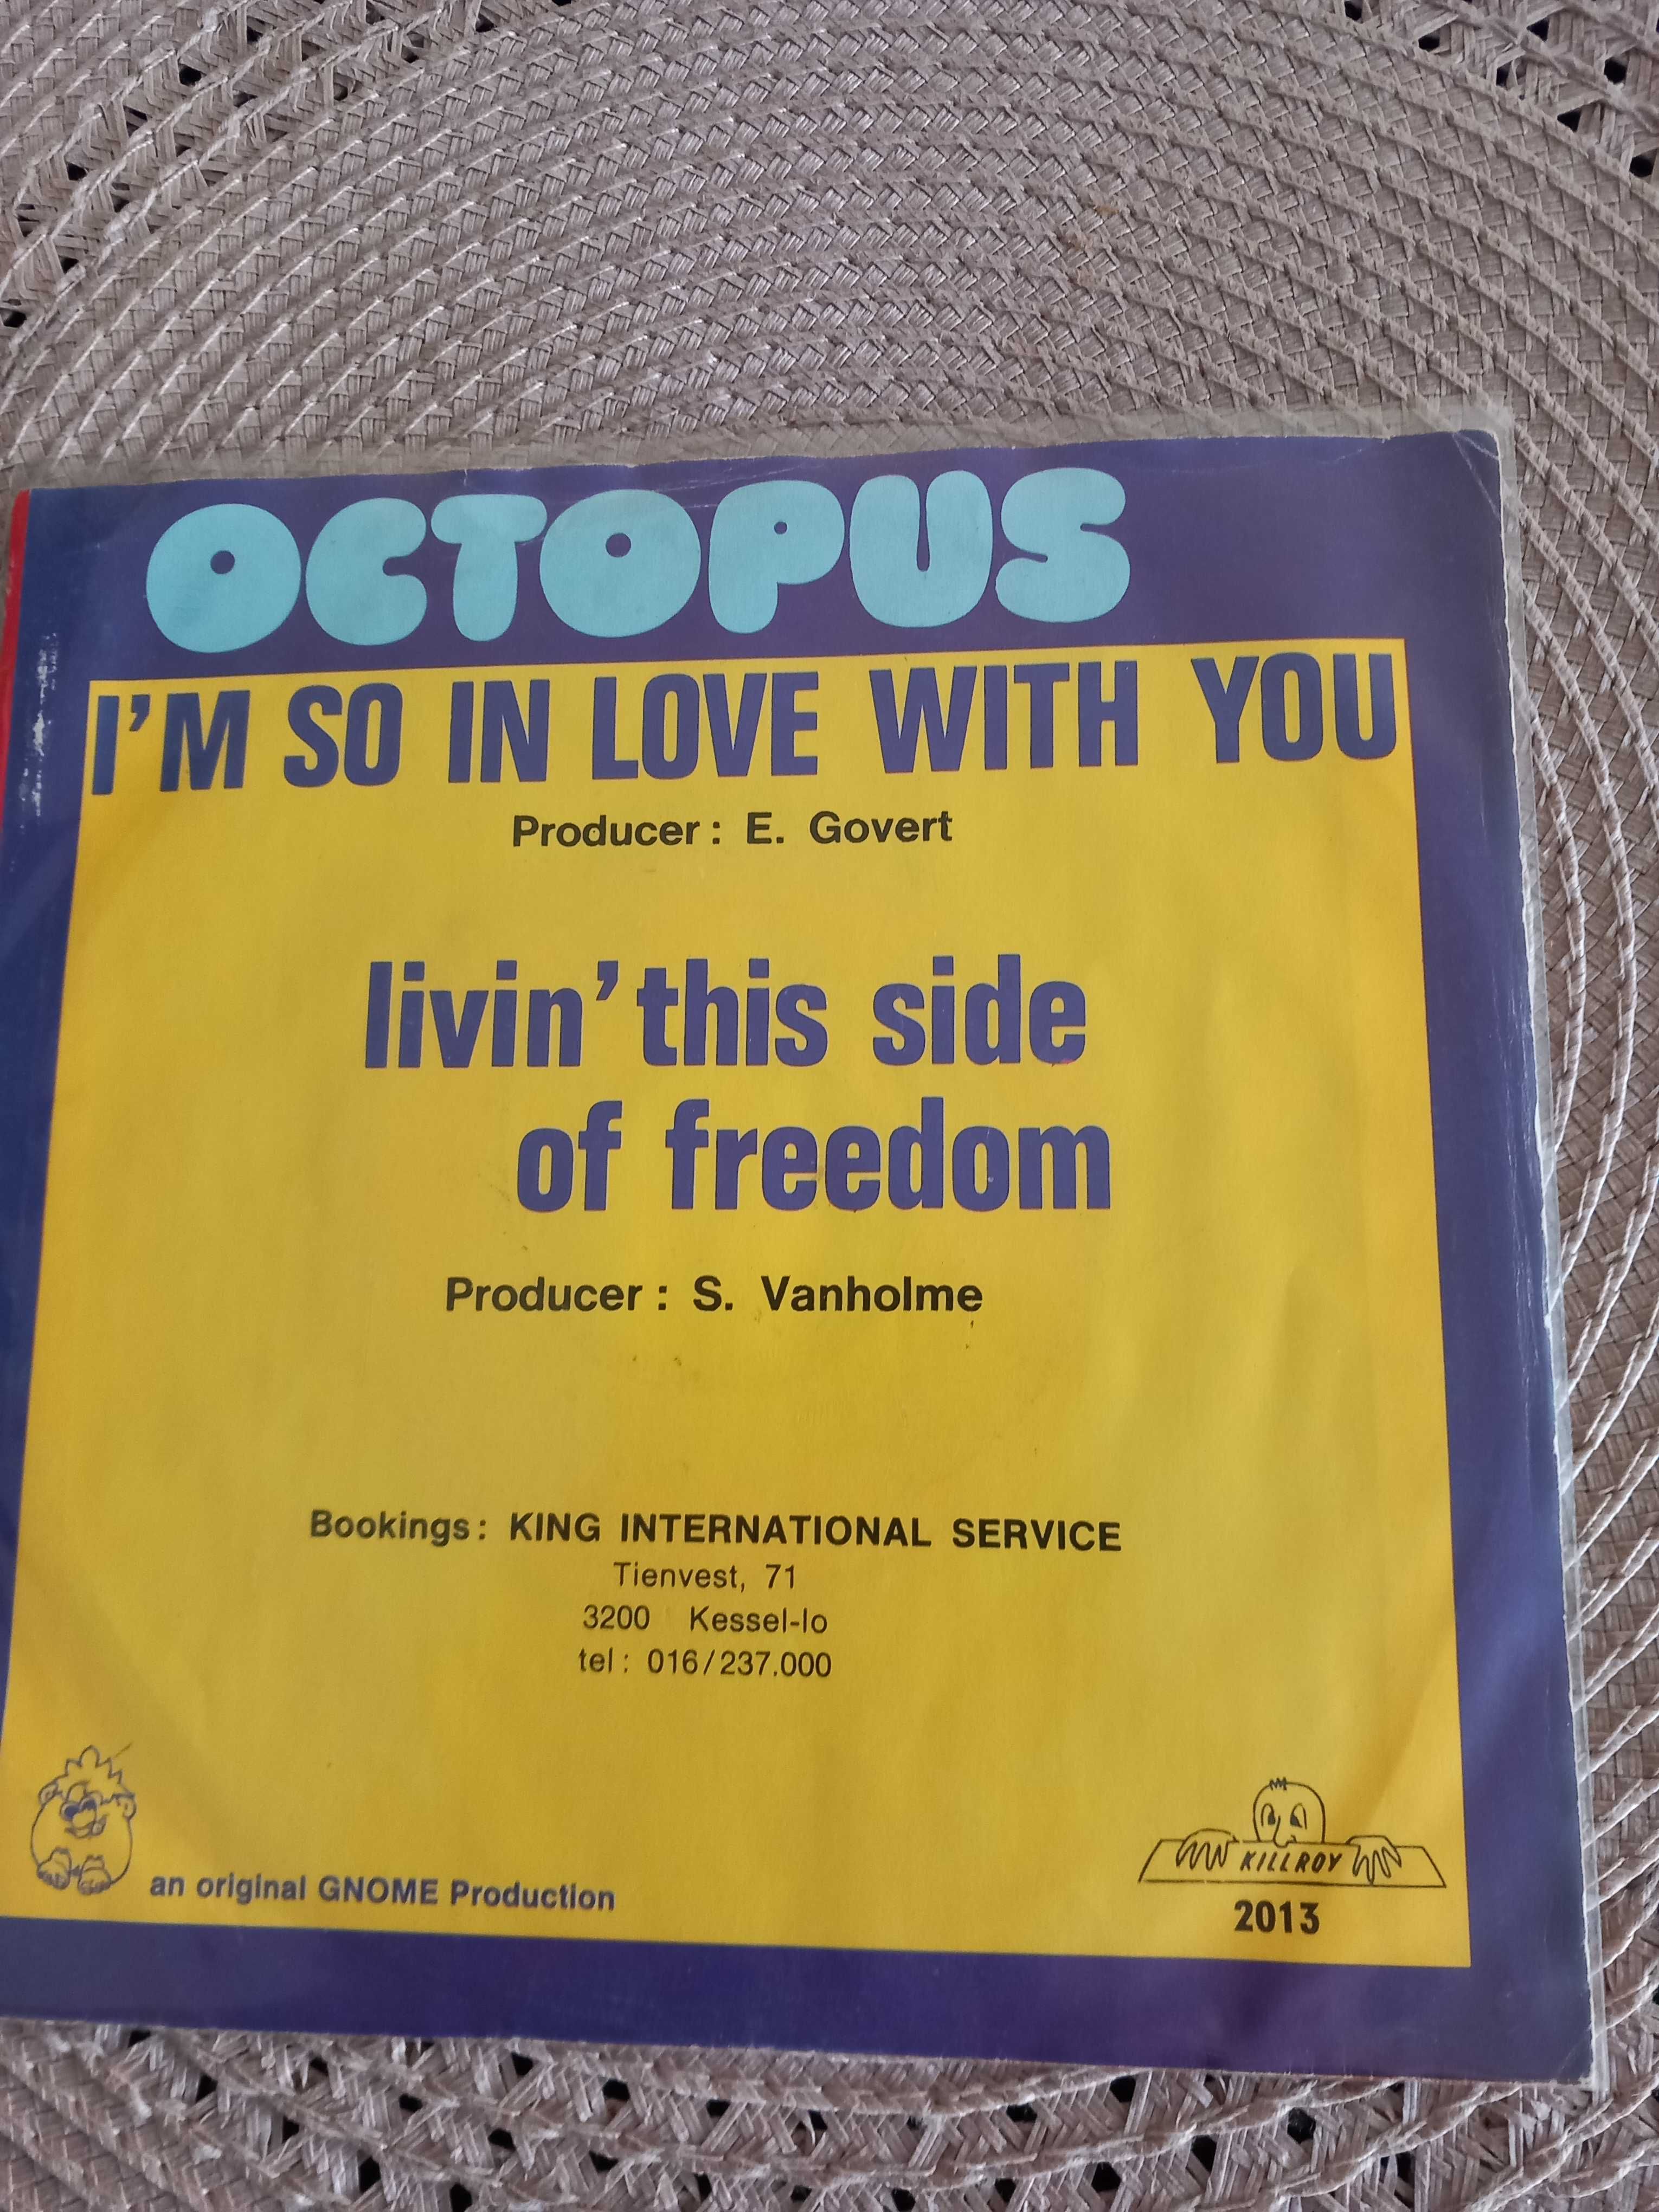 Octopus - im so in love with you / livin this side of freedom